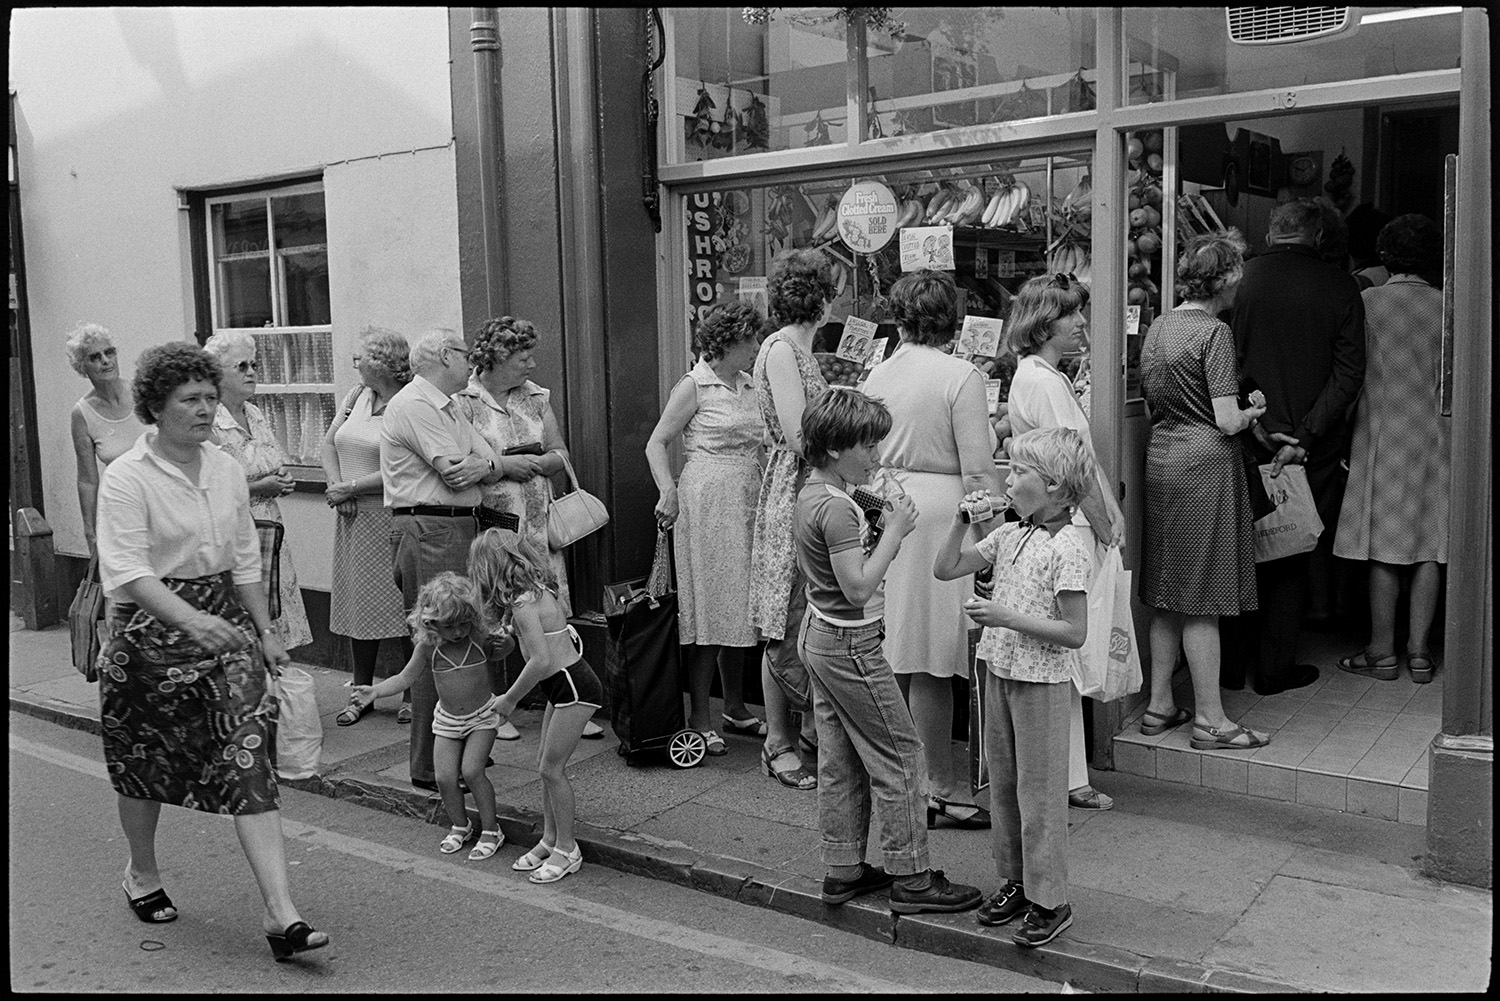 Street scenes, passers by. 
[Women, children and a man queuing on the pavement outside Patt's Stores in Mill Street, Bideford. Fruit and vegetables are on display in the greengrocer's shop front window. Two of the children are drinking from coca cola bottles in the foreground.]